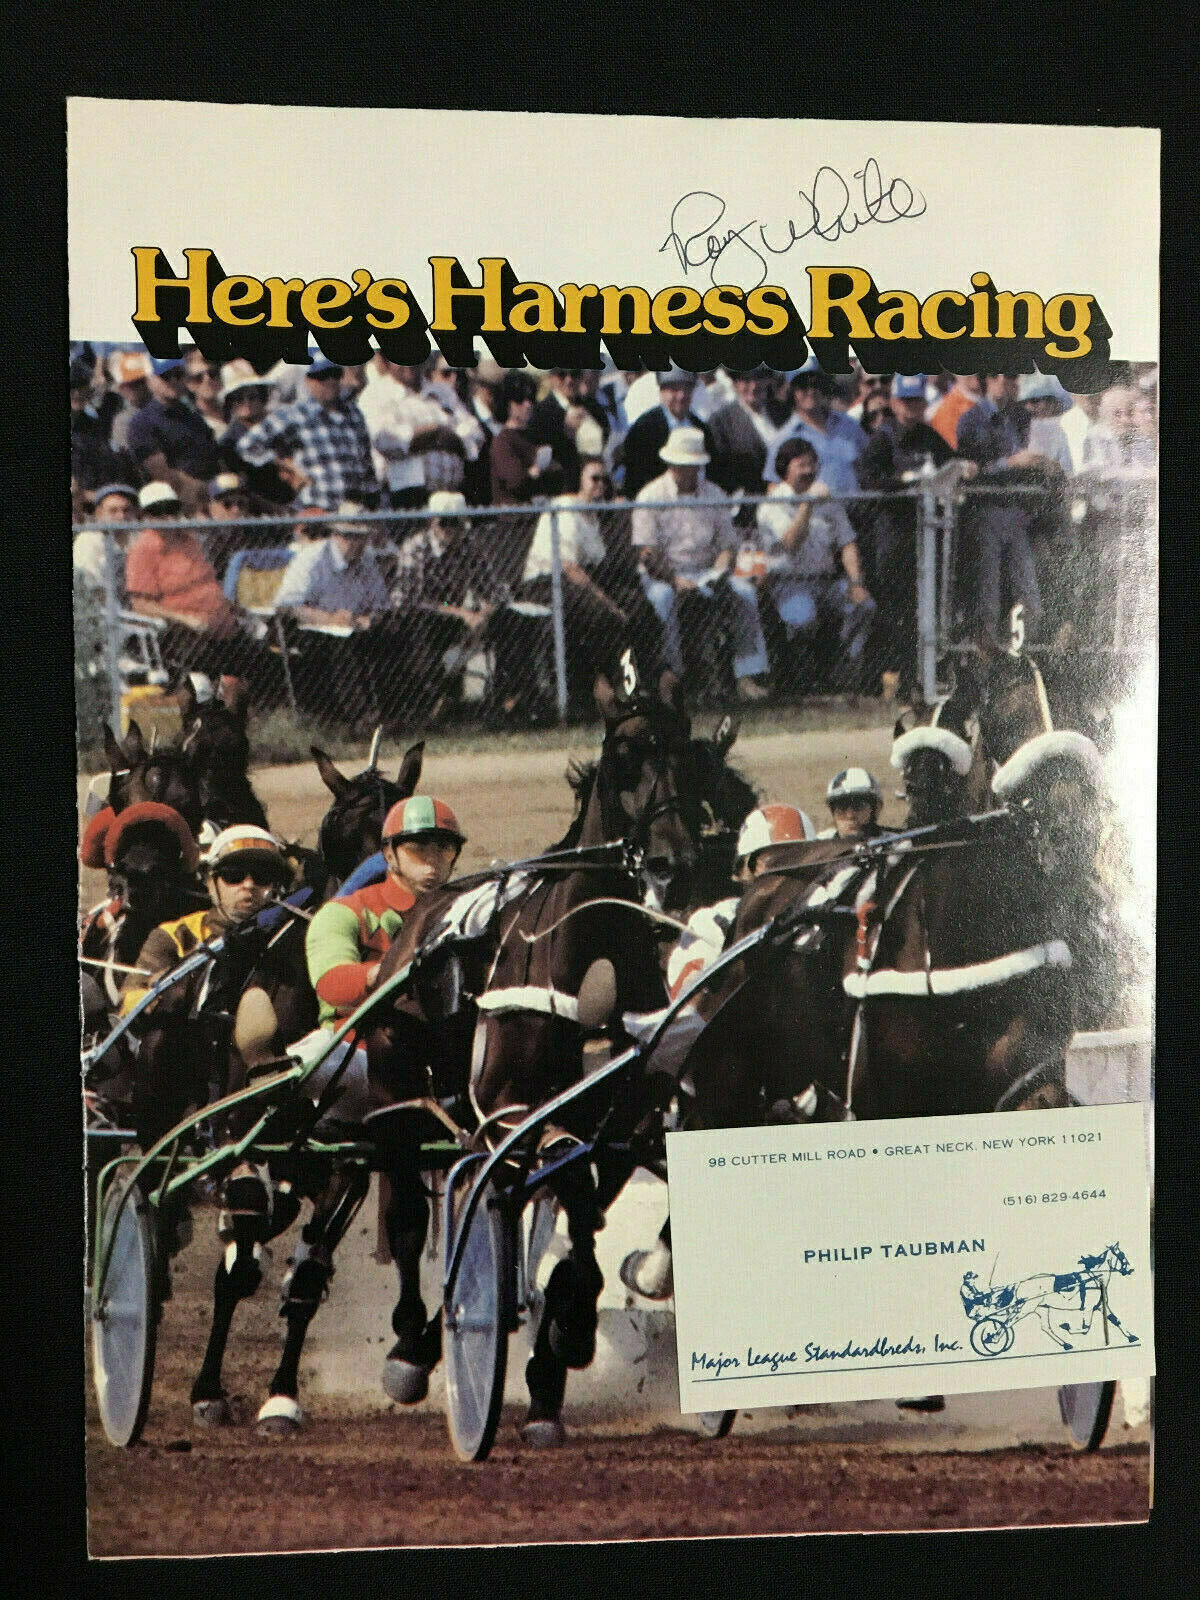 Roy White - New York Yankees - AUTOGRAPHED Harness Racing Brochure